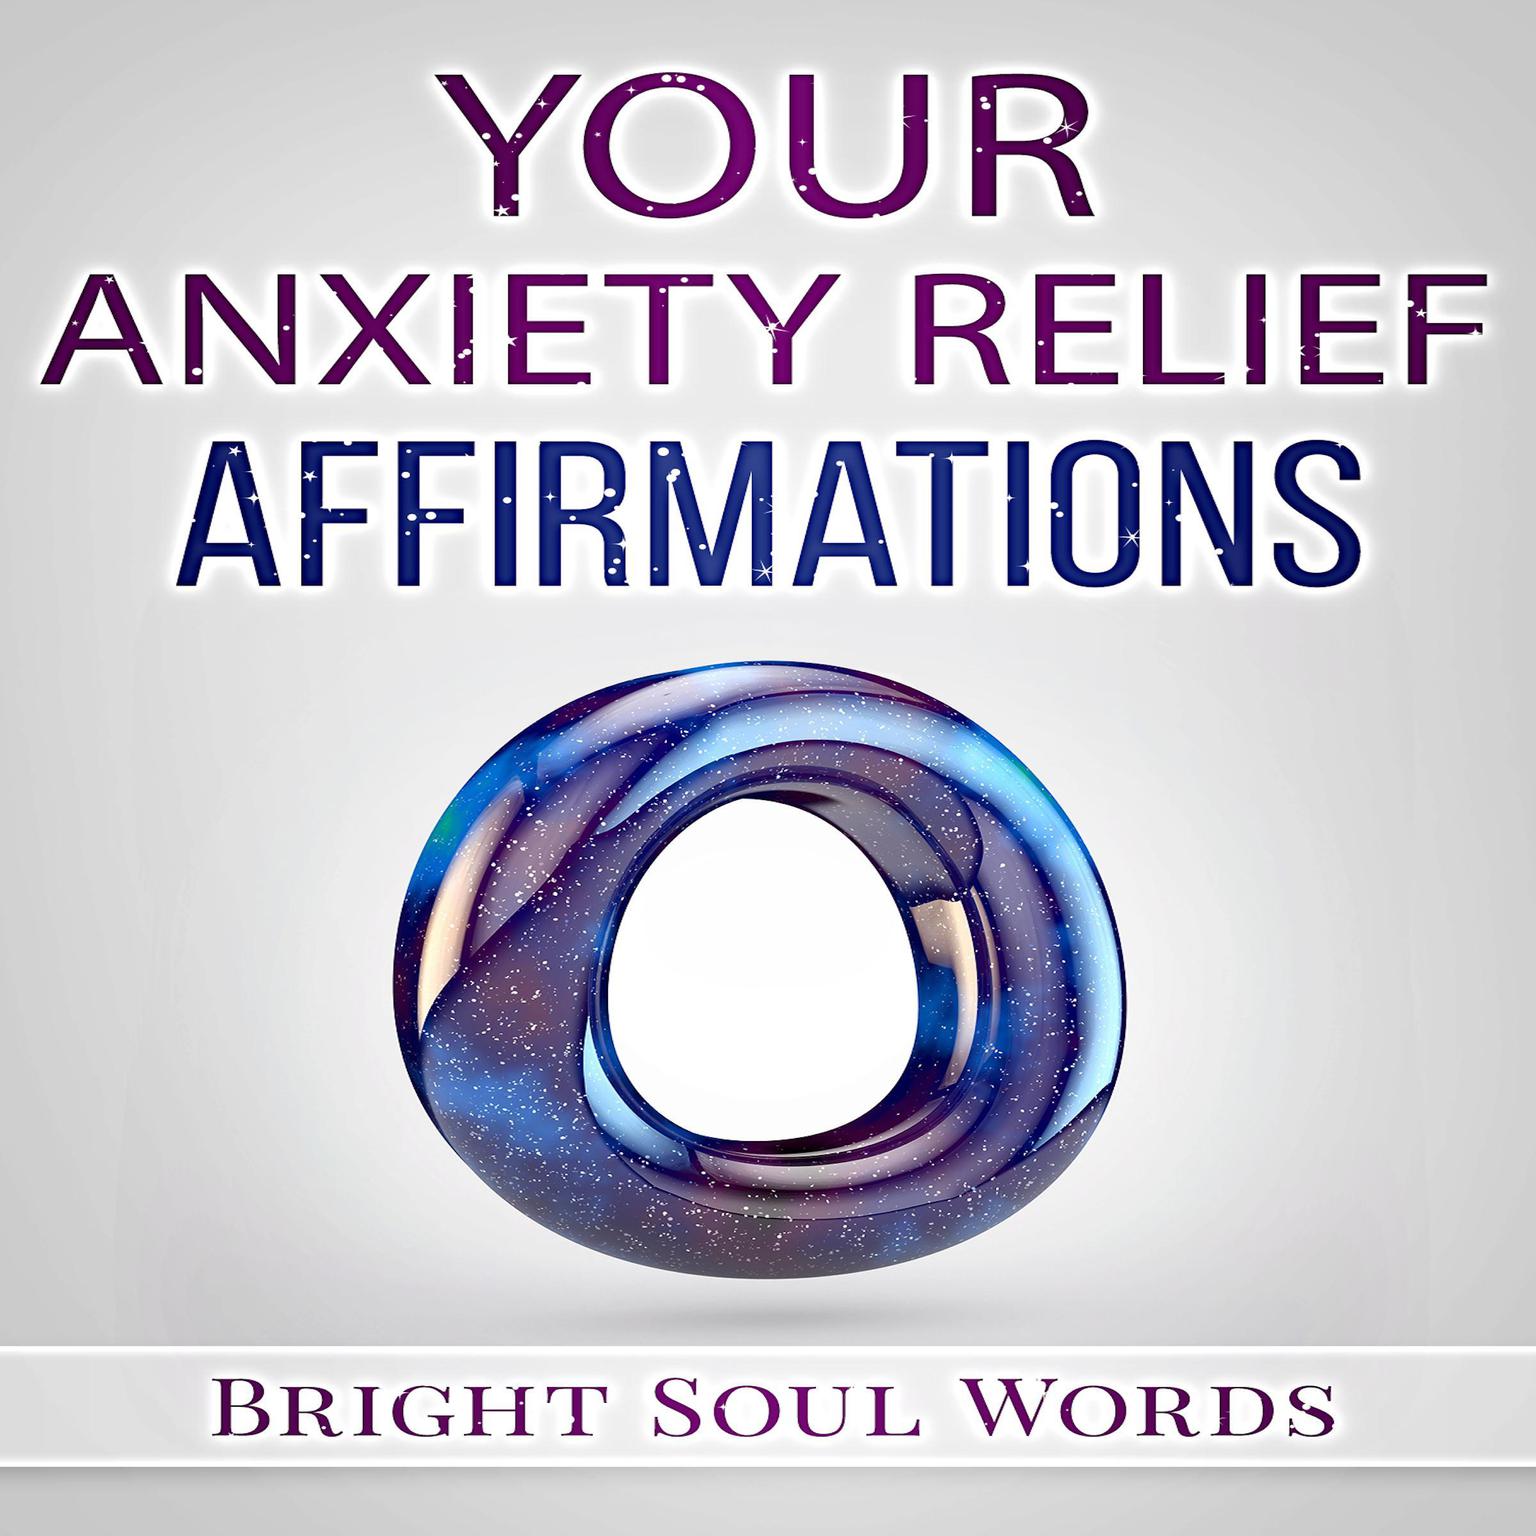 Your Anxiety Relief Affirmations Audiobook, by Bright Soul Words